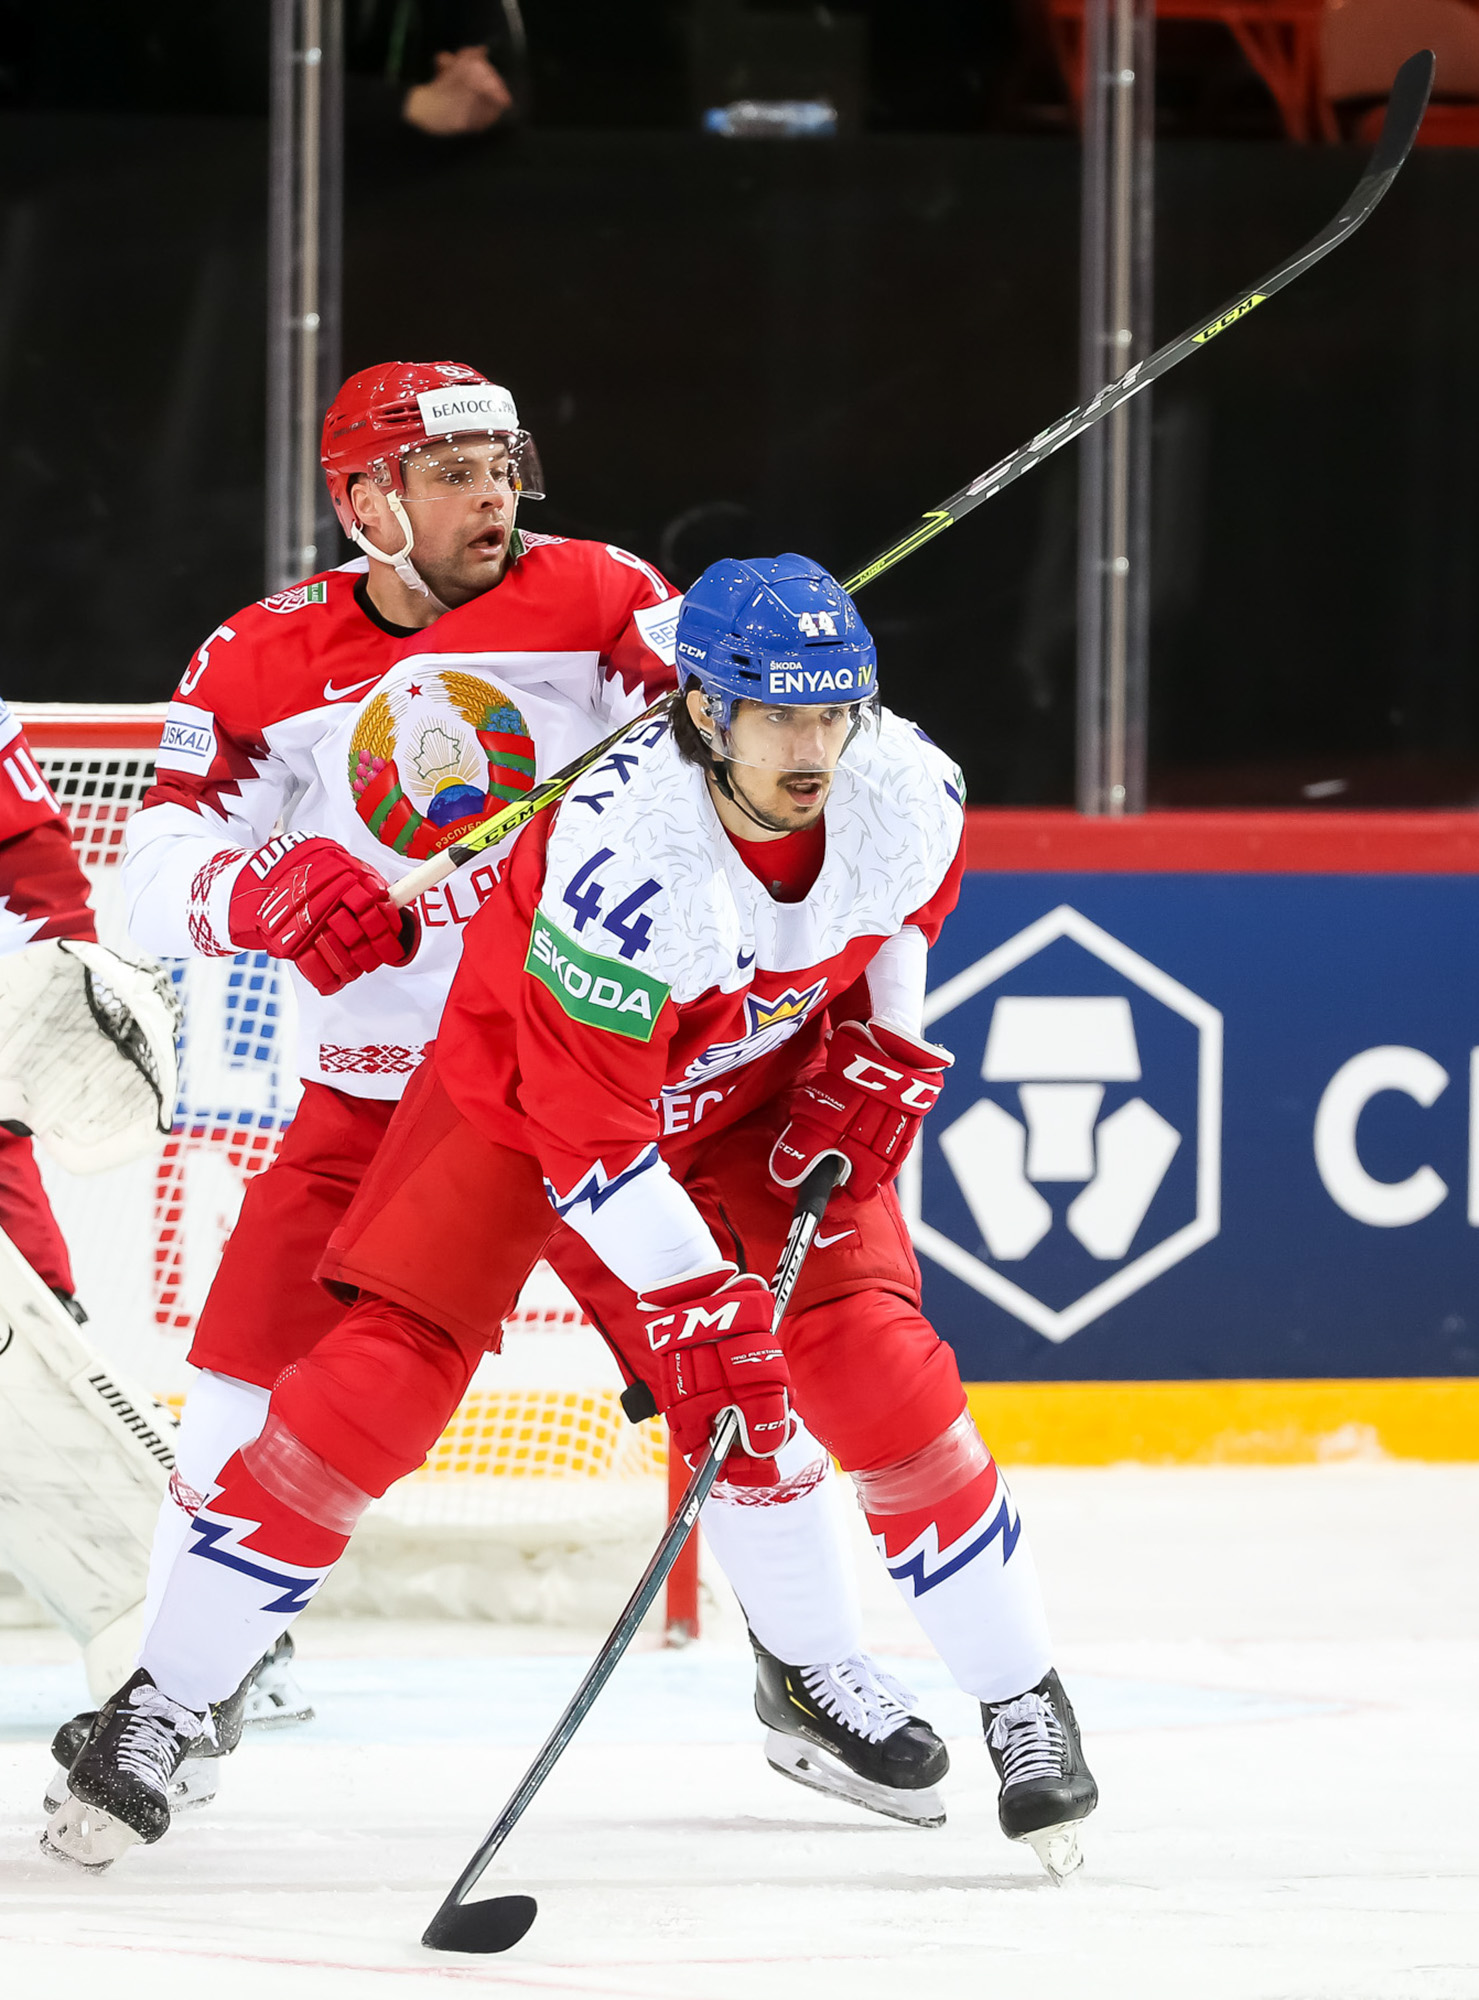 Filip Hronek (CZE) in action during the 2021 IIHF Ice Hockey World